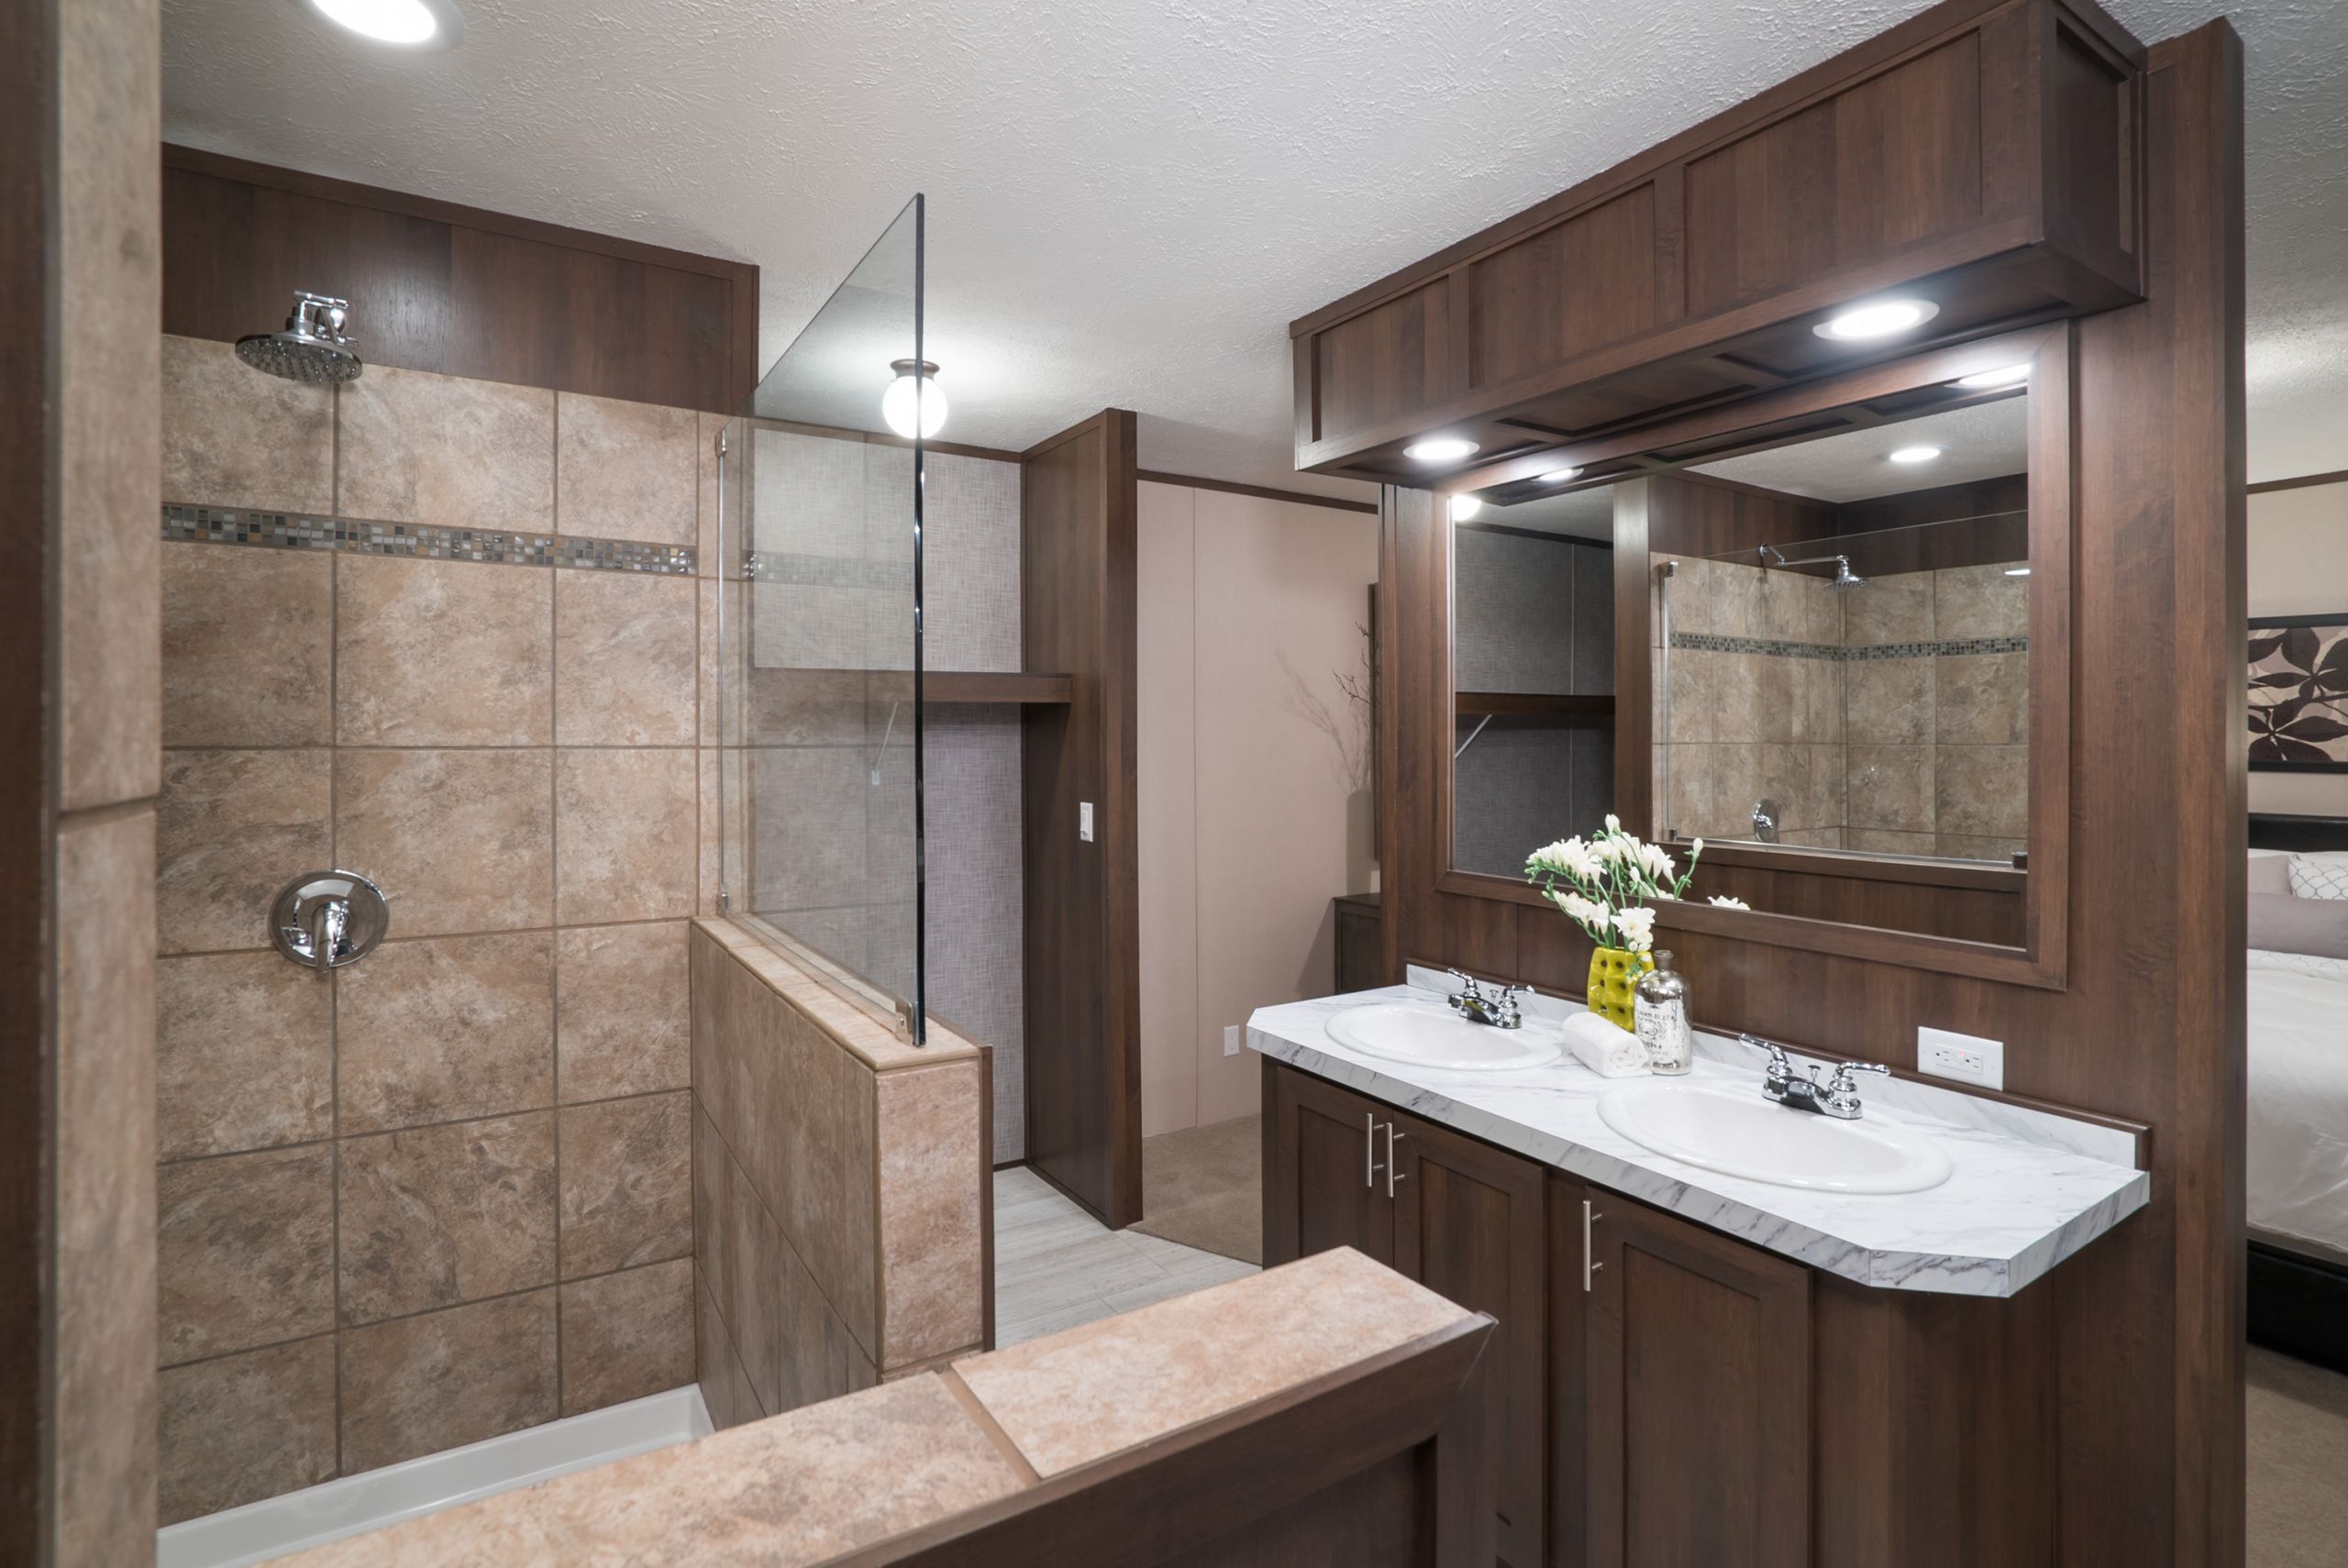 Mobile Home Bathroom Showers
 5 Bathroom Shower Design Ideas for Your Manufactured Home